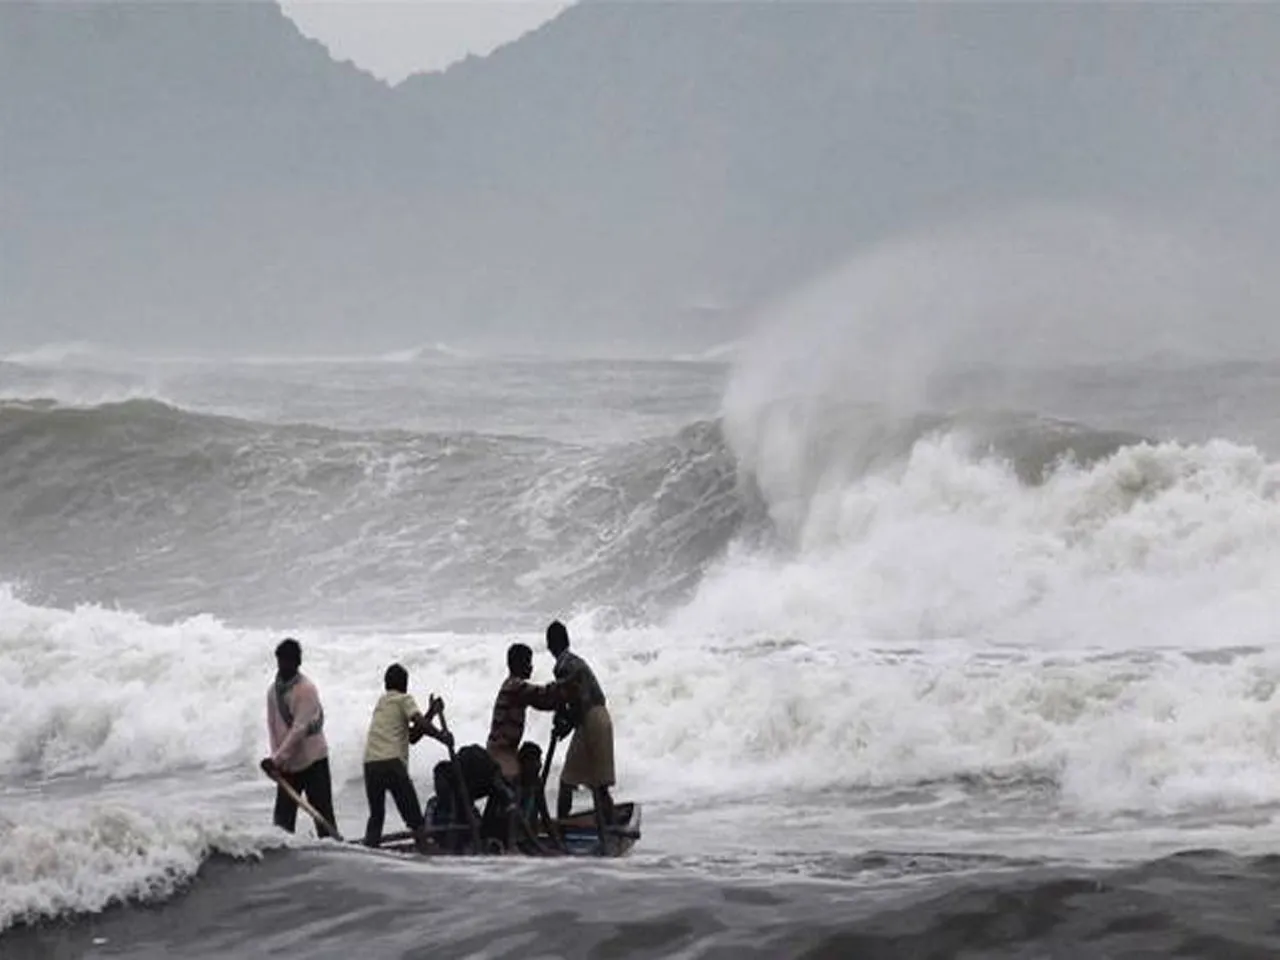 Cyclone 'Mocha' is moving fast, High alert on 12th May